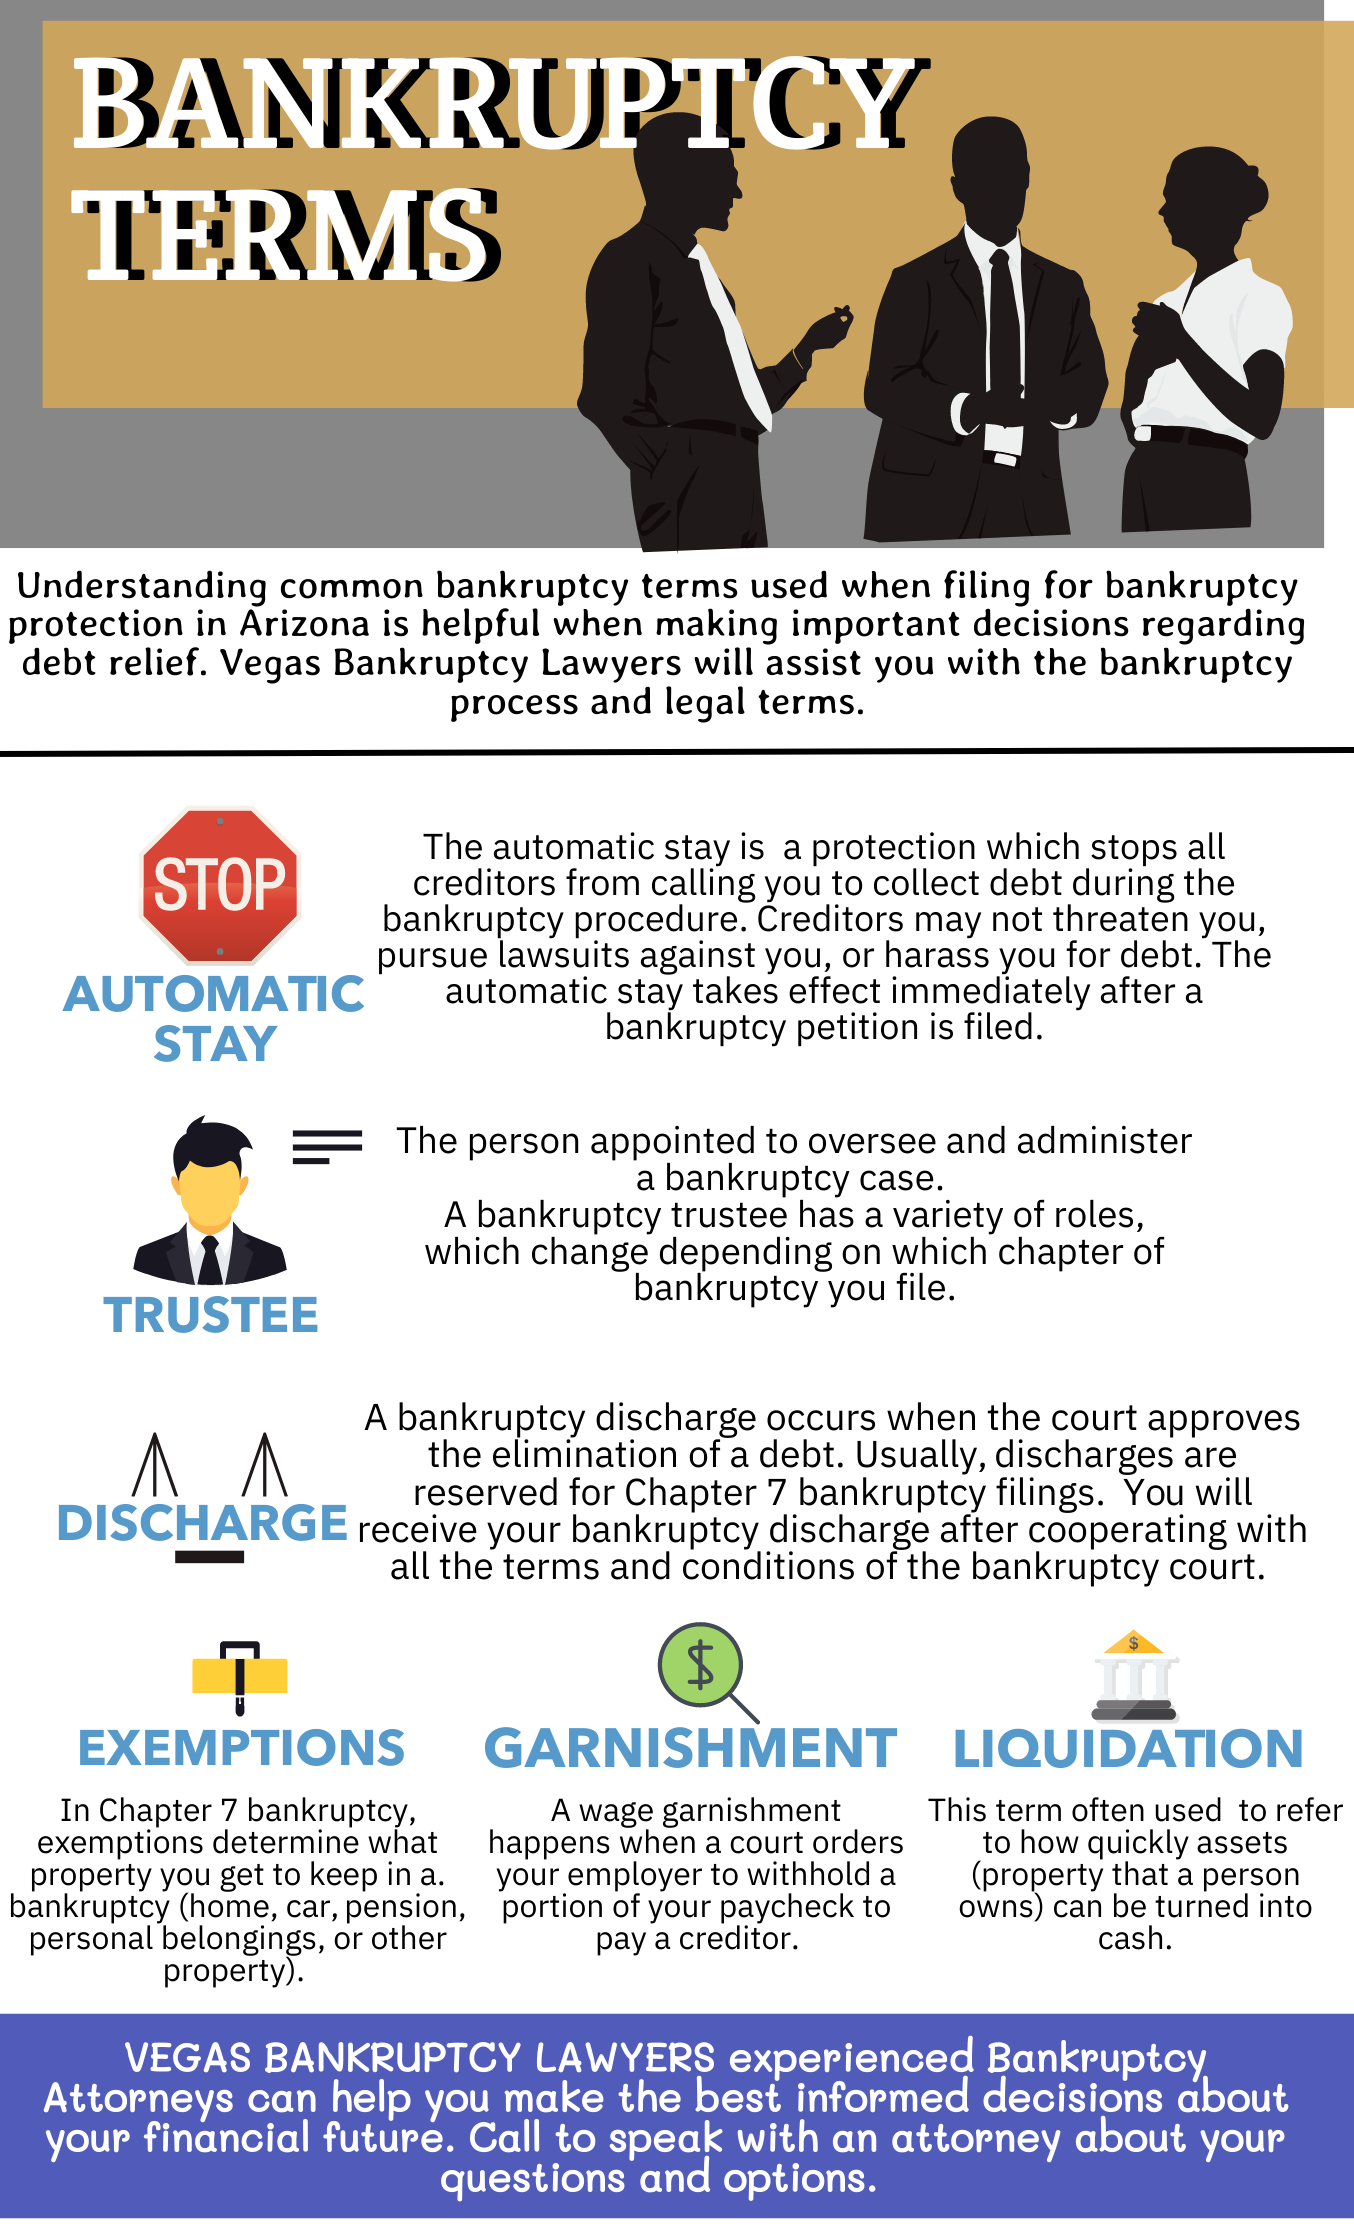 Infographic explaining bankruptcy law terms